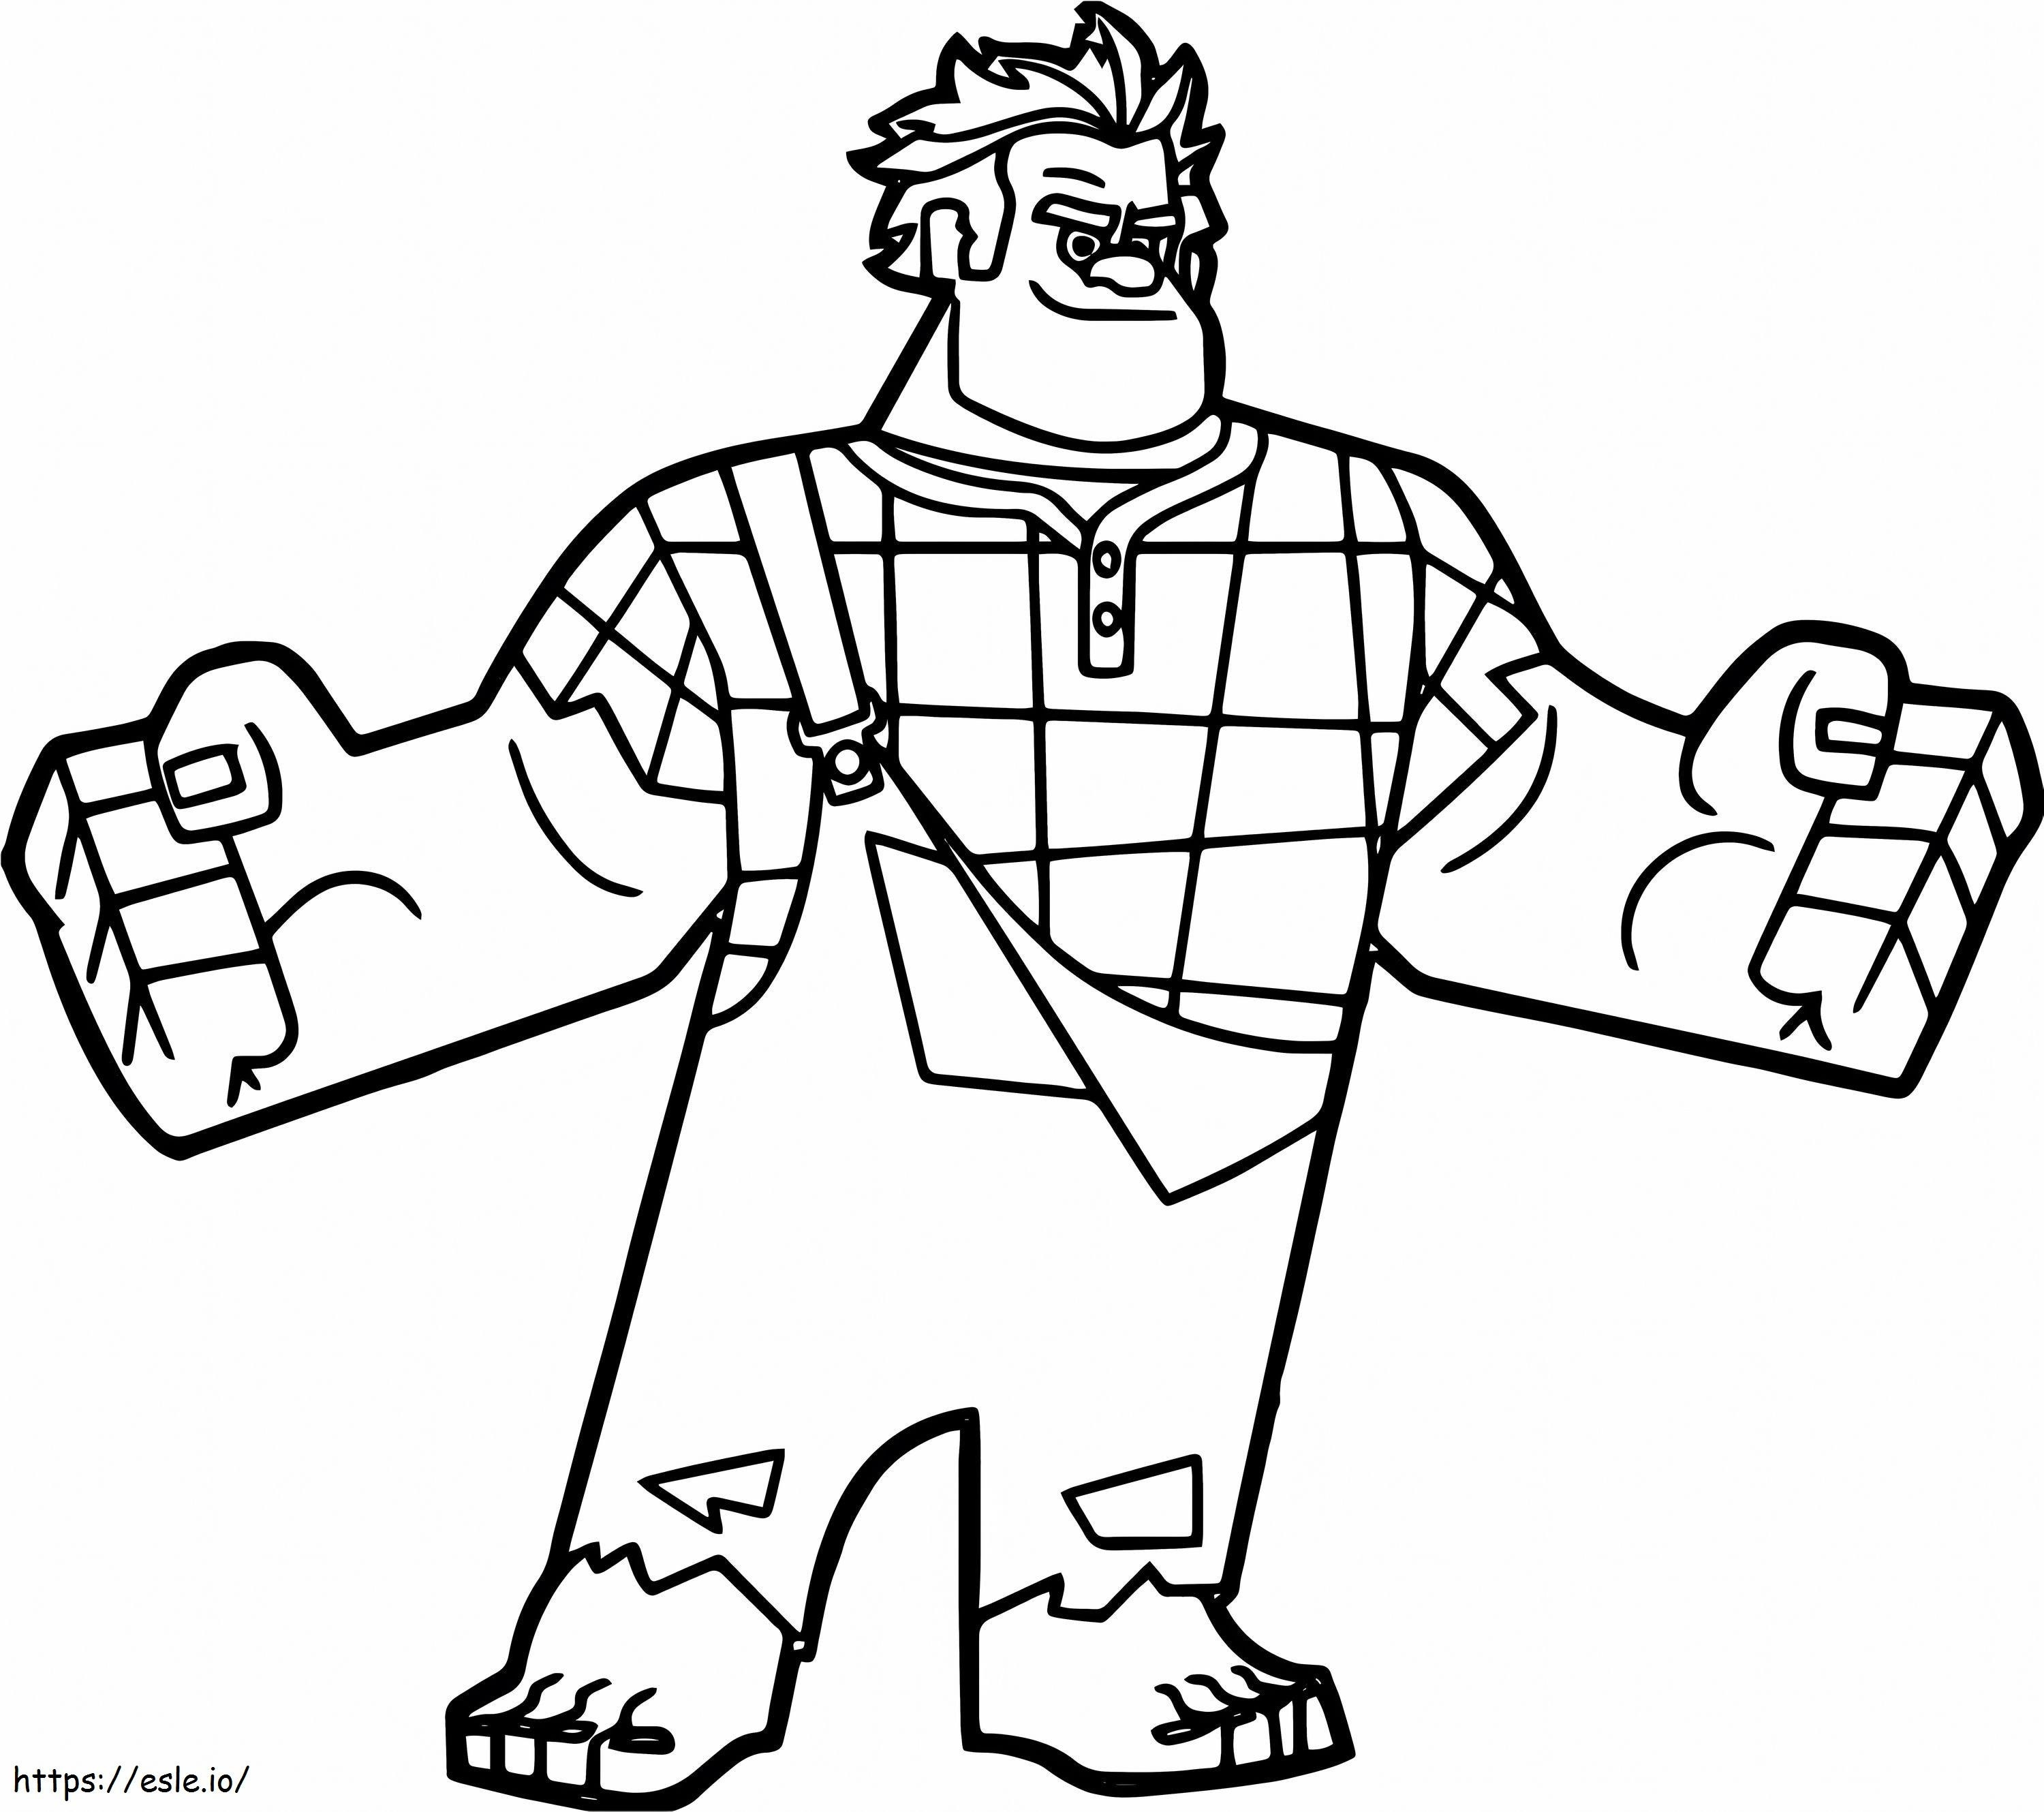 S coloring page